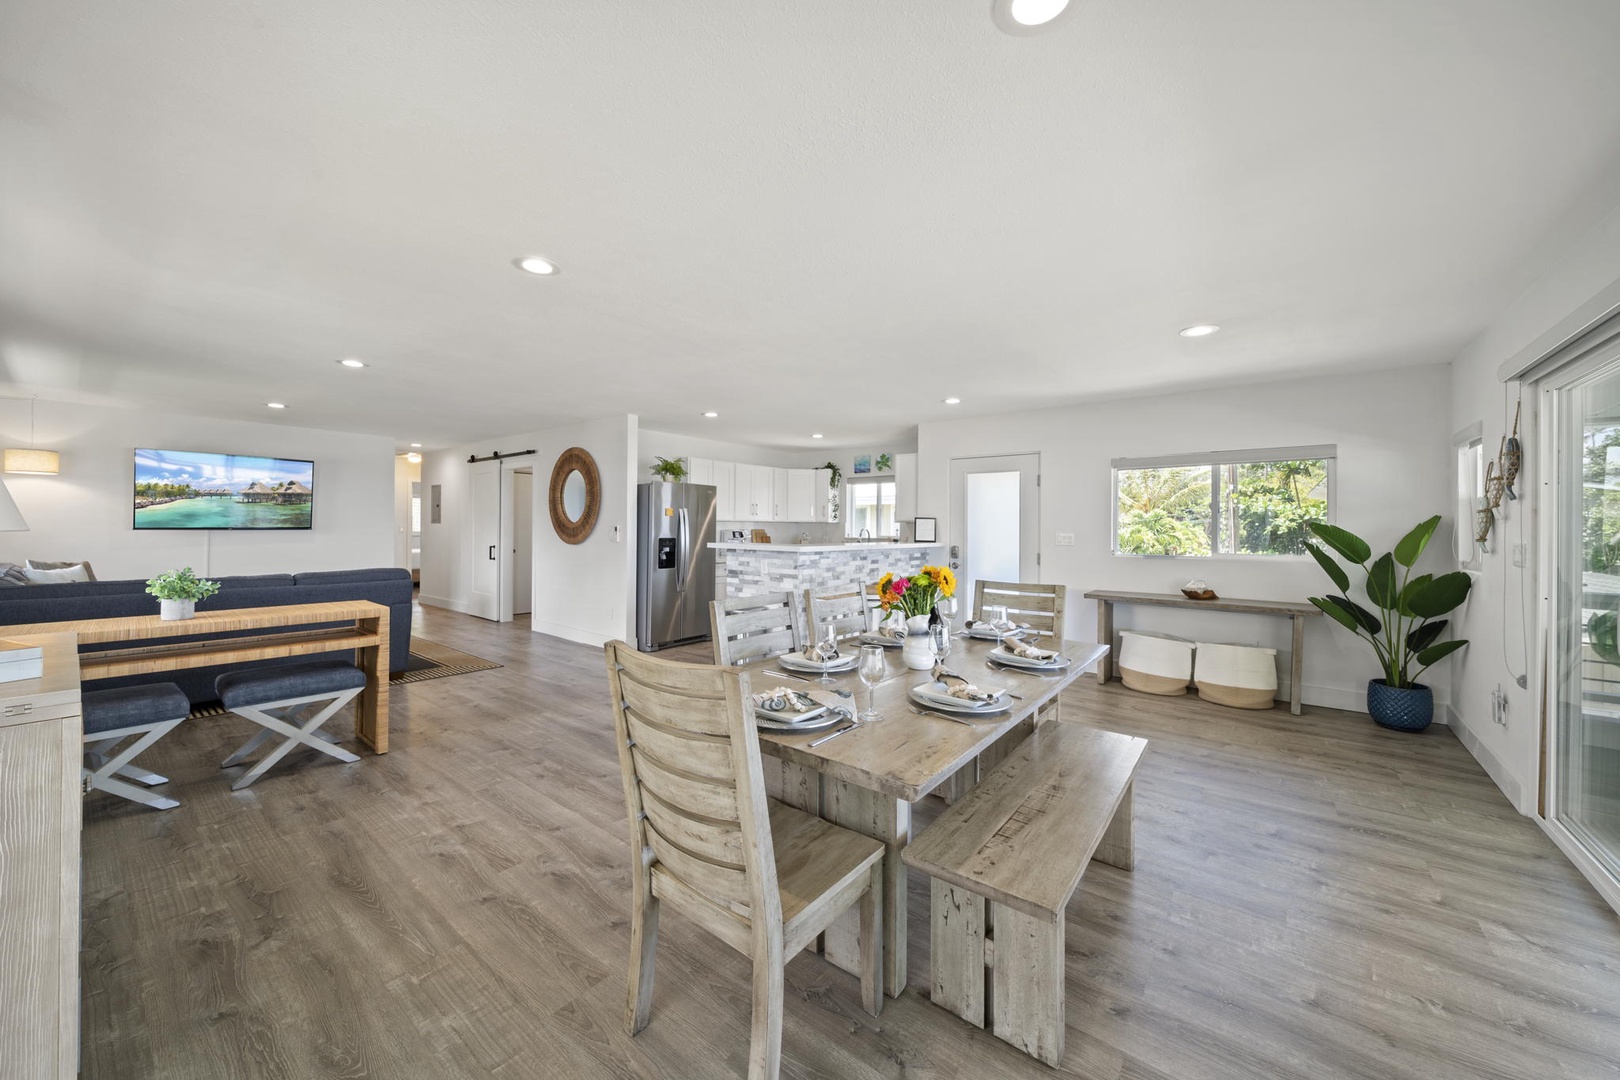 Haleiwa Vacation Rentals, Hale Nalu - The formal dining area upstairs opens up to the living area and kitchen